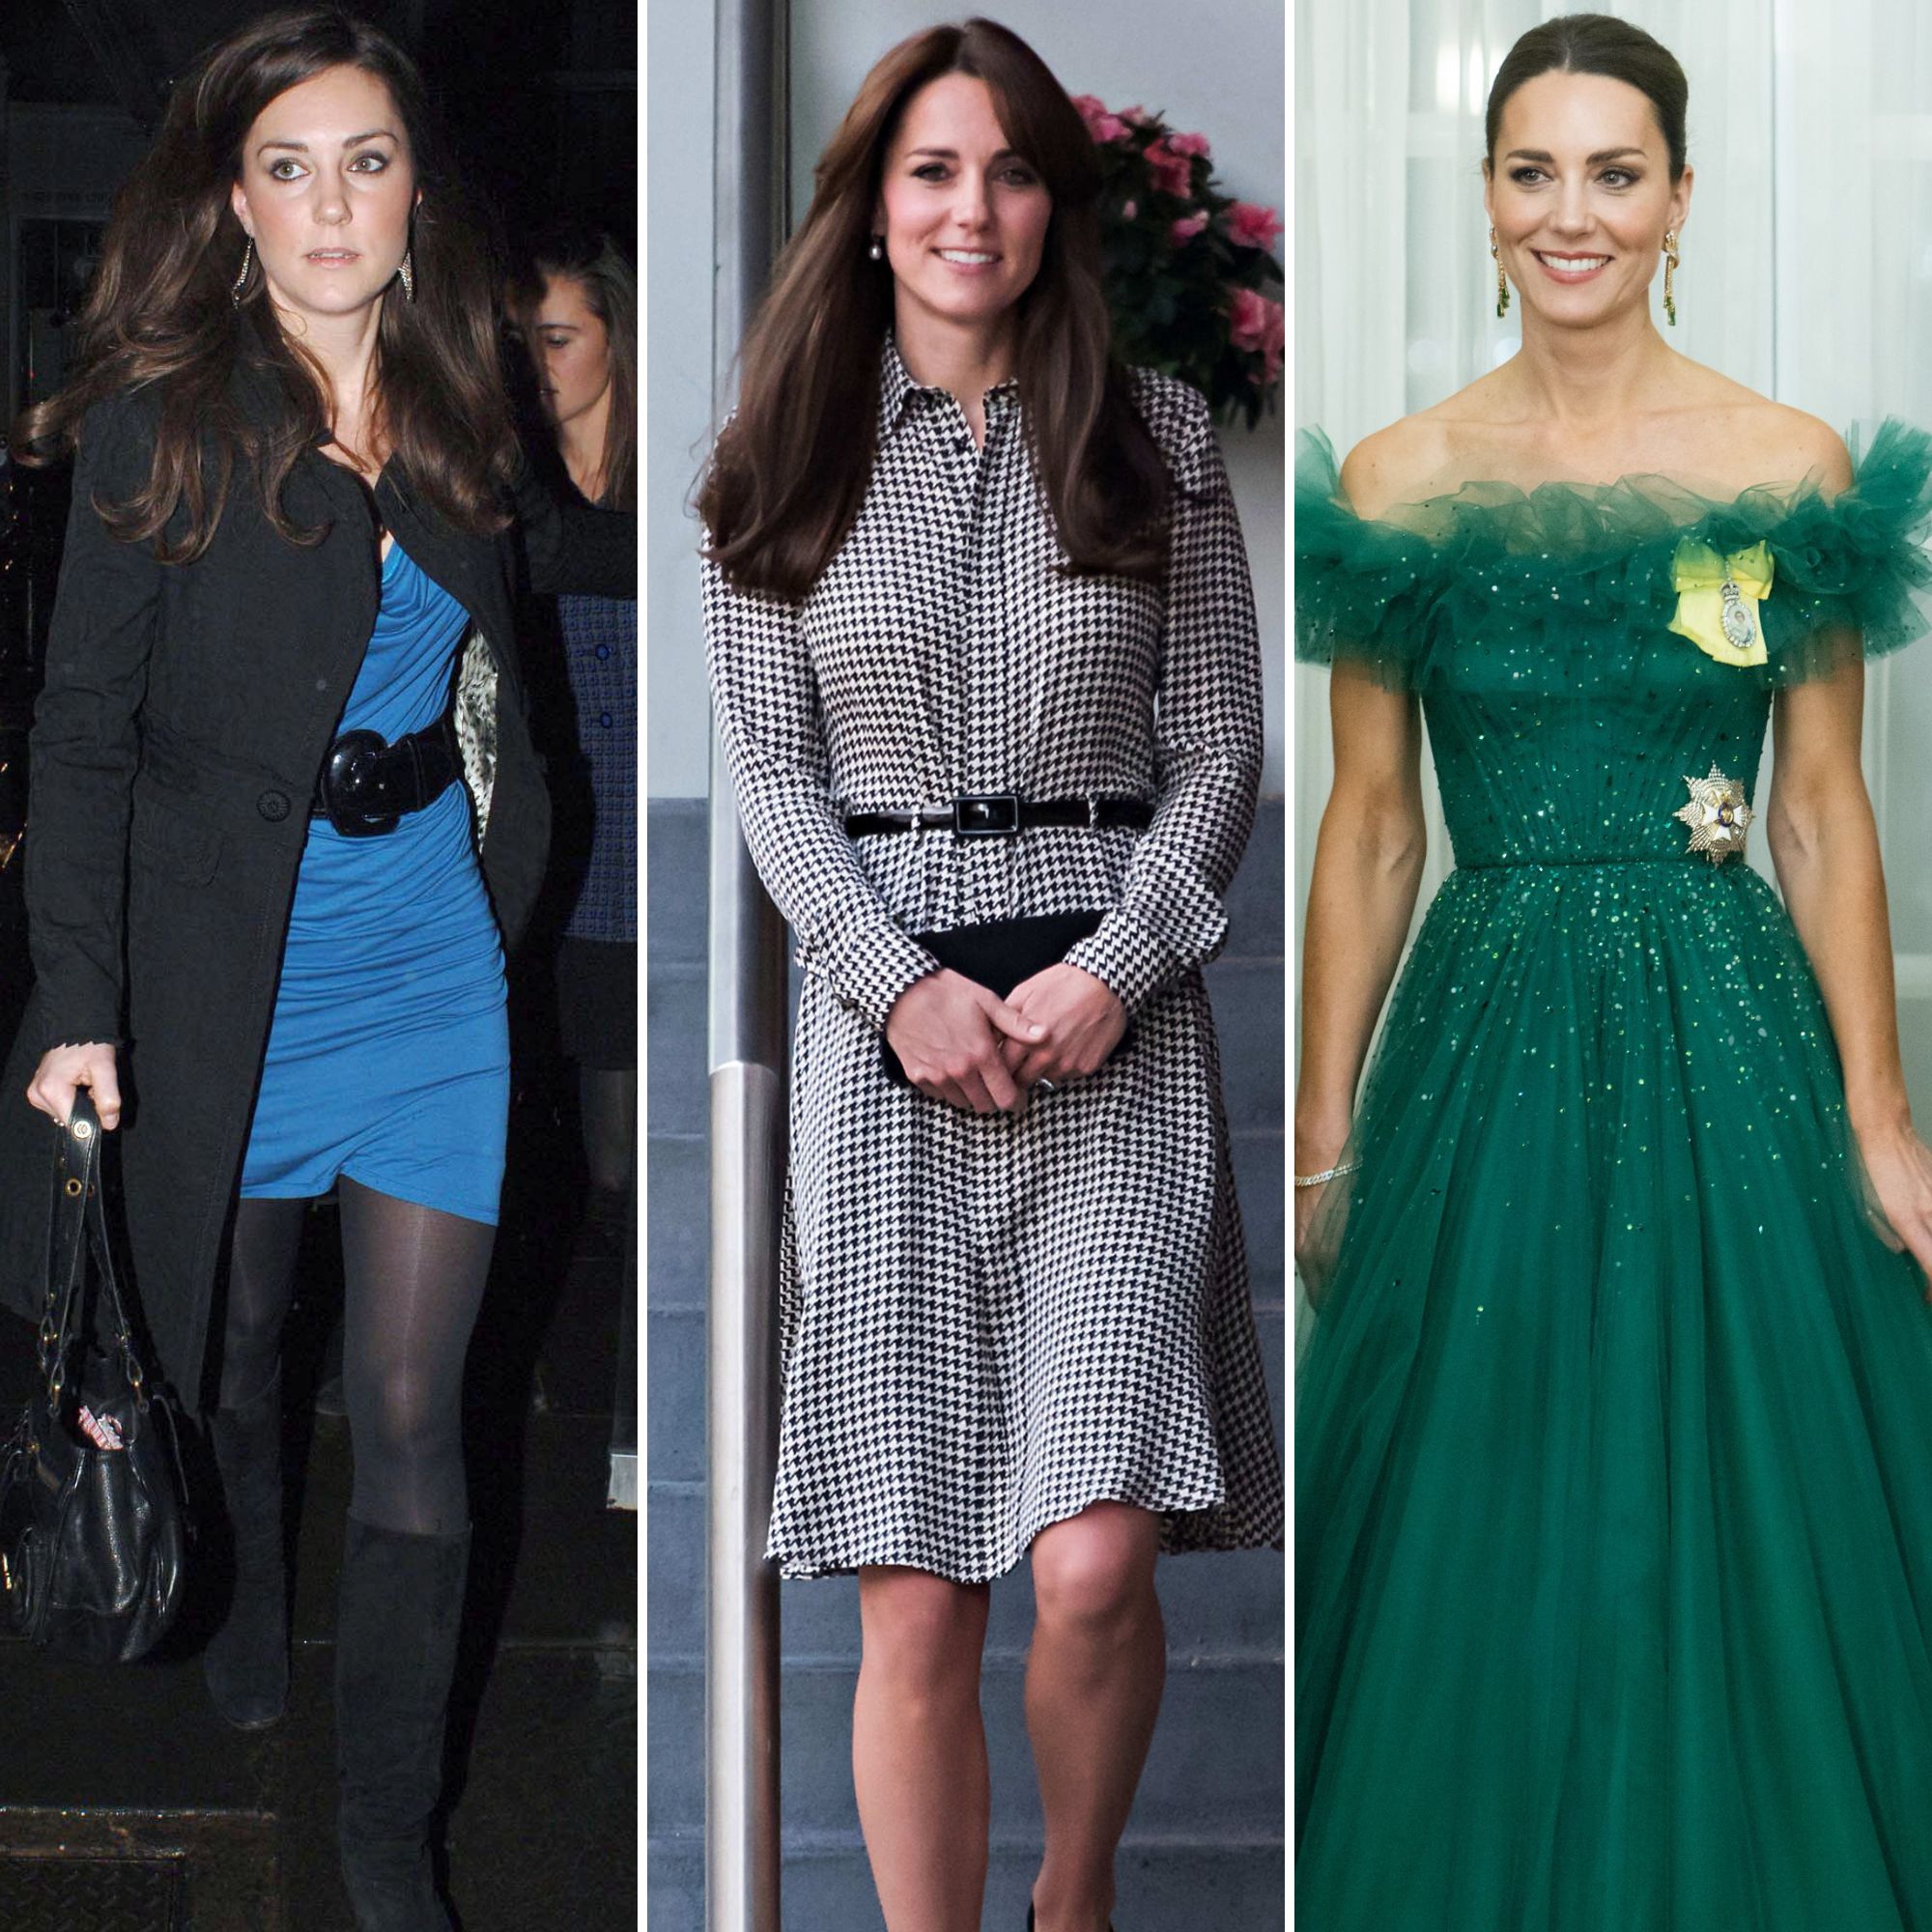 47 Times Kate Middleton Has Worn the Color Blue Over the Years